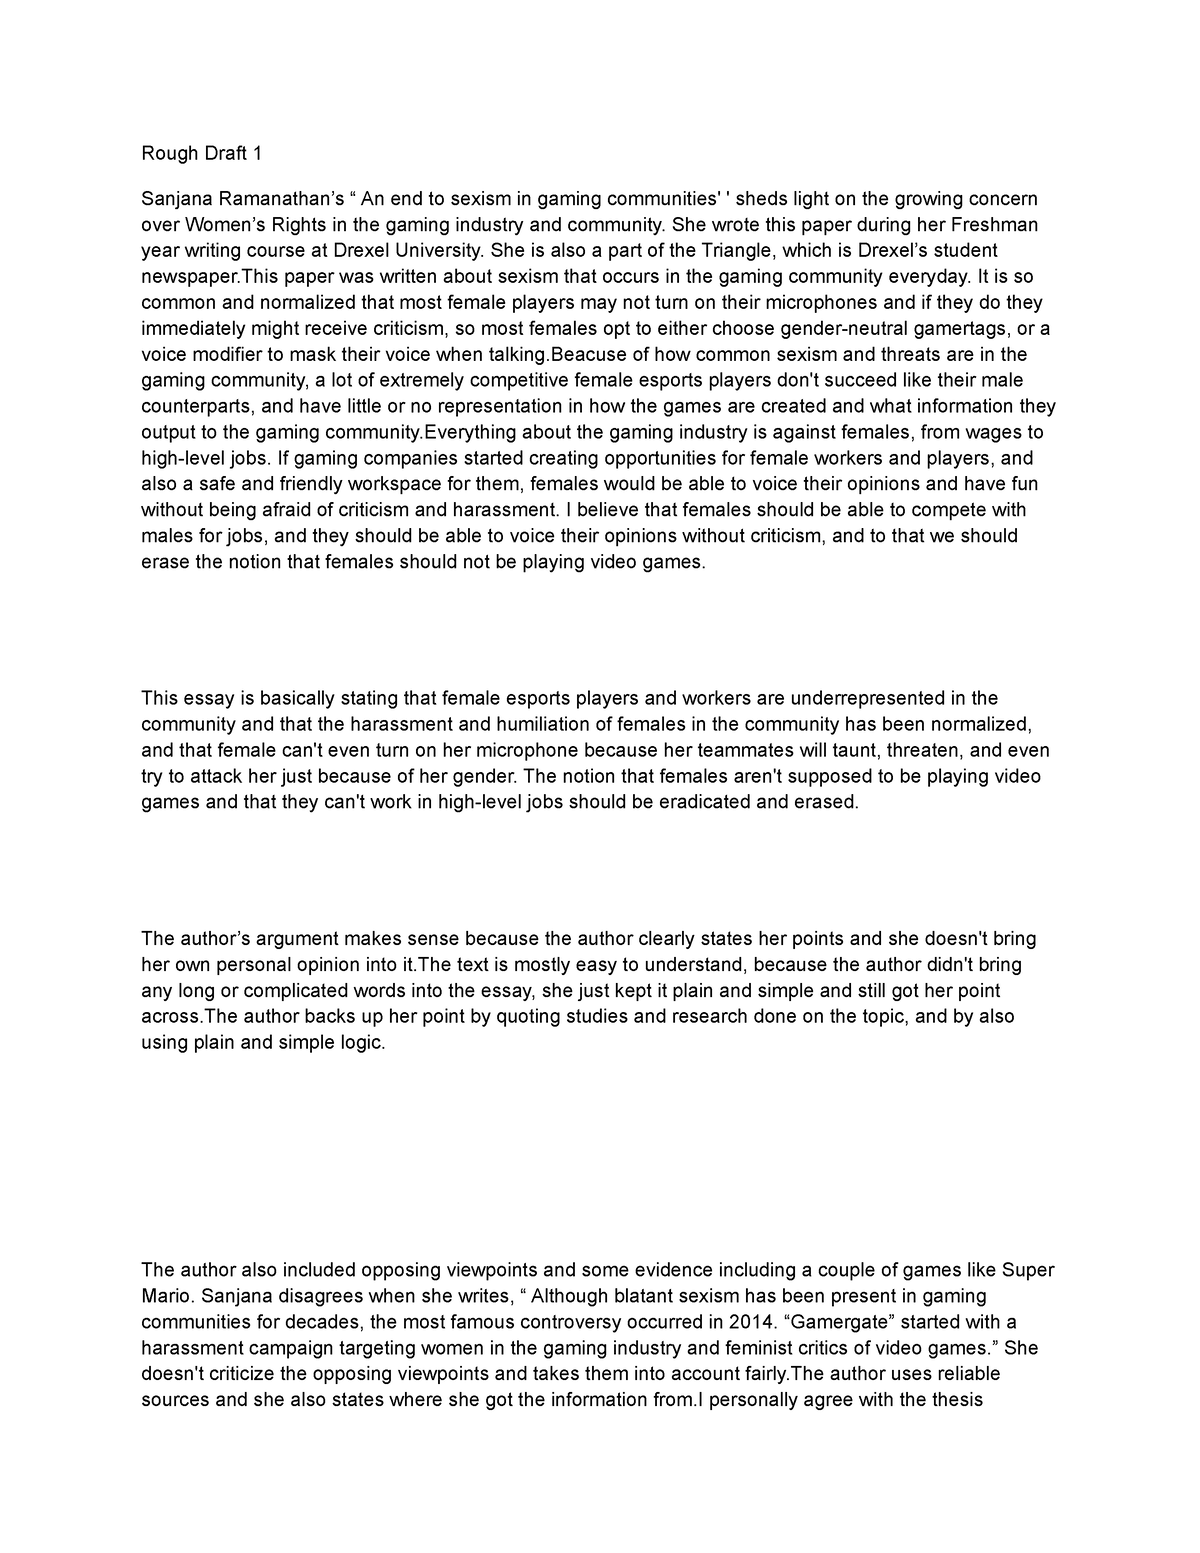 Rough Draft Paper Rough Draft 1 Sanjana Ramanathans “ An End To Sexism In Gaming Communities 4663